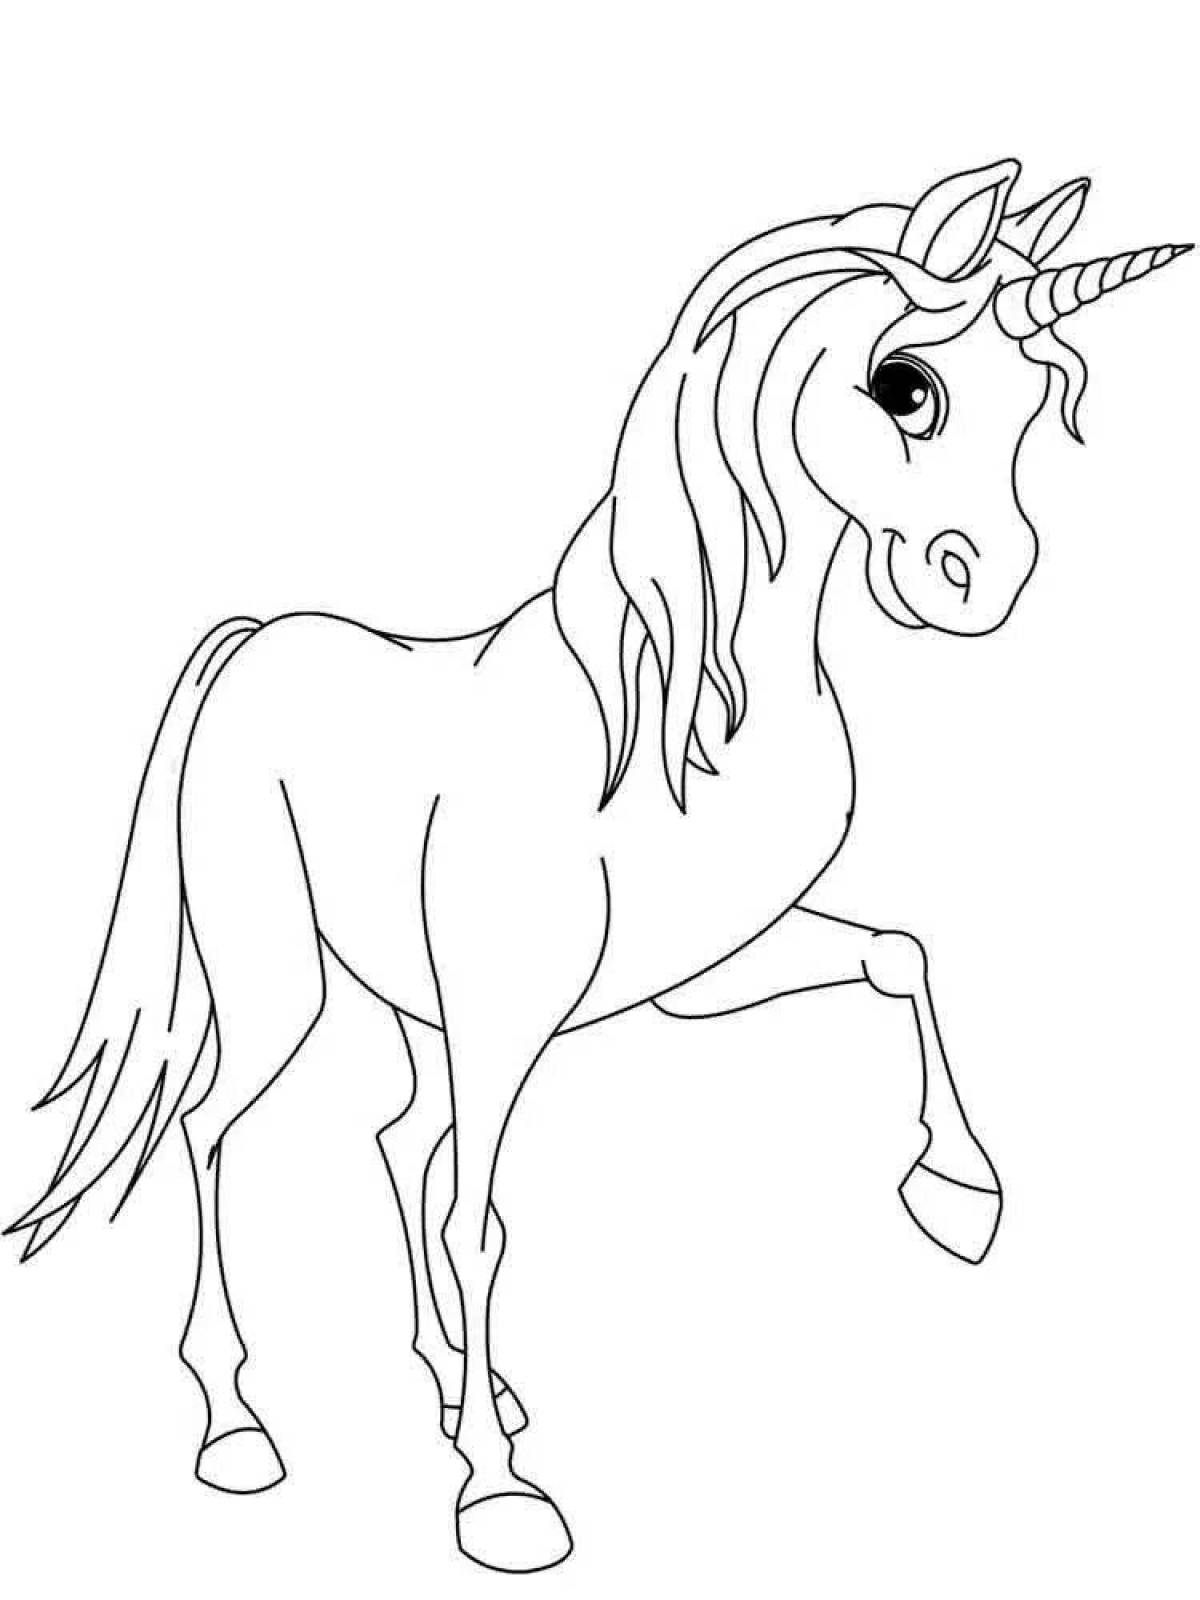 Radiant coloring page horse unicorn